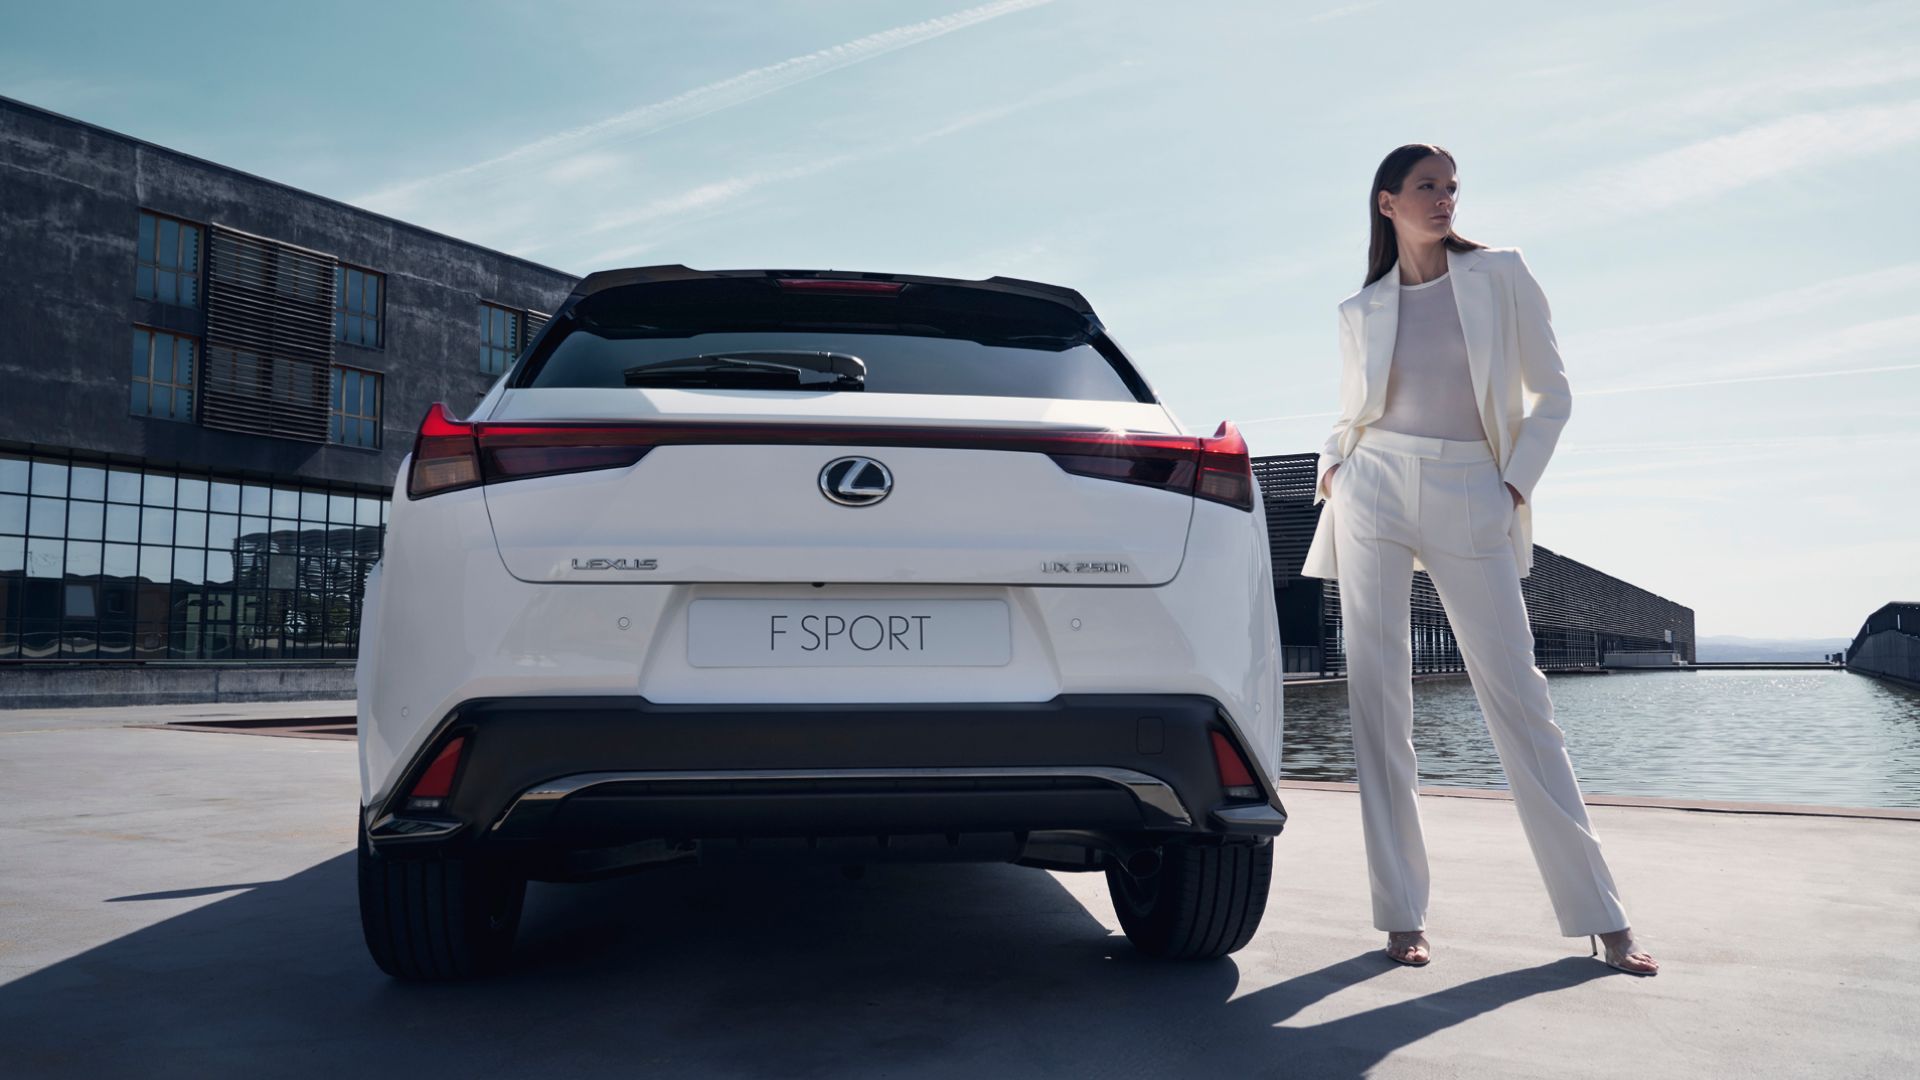 A person stood next to a Lexus UX F Sport